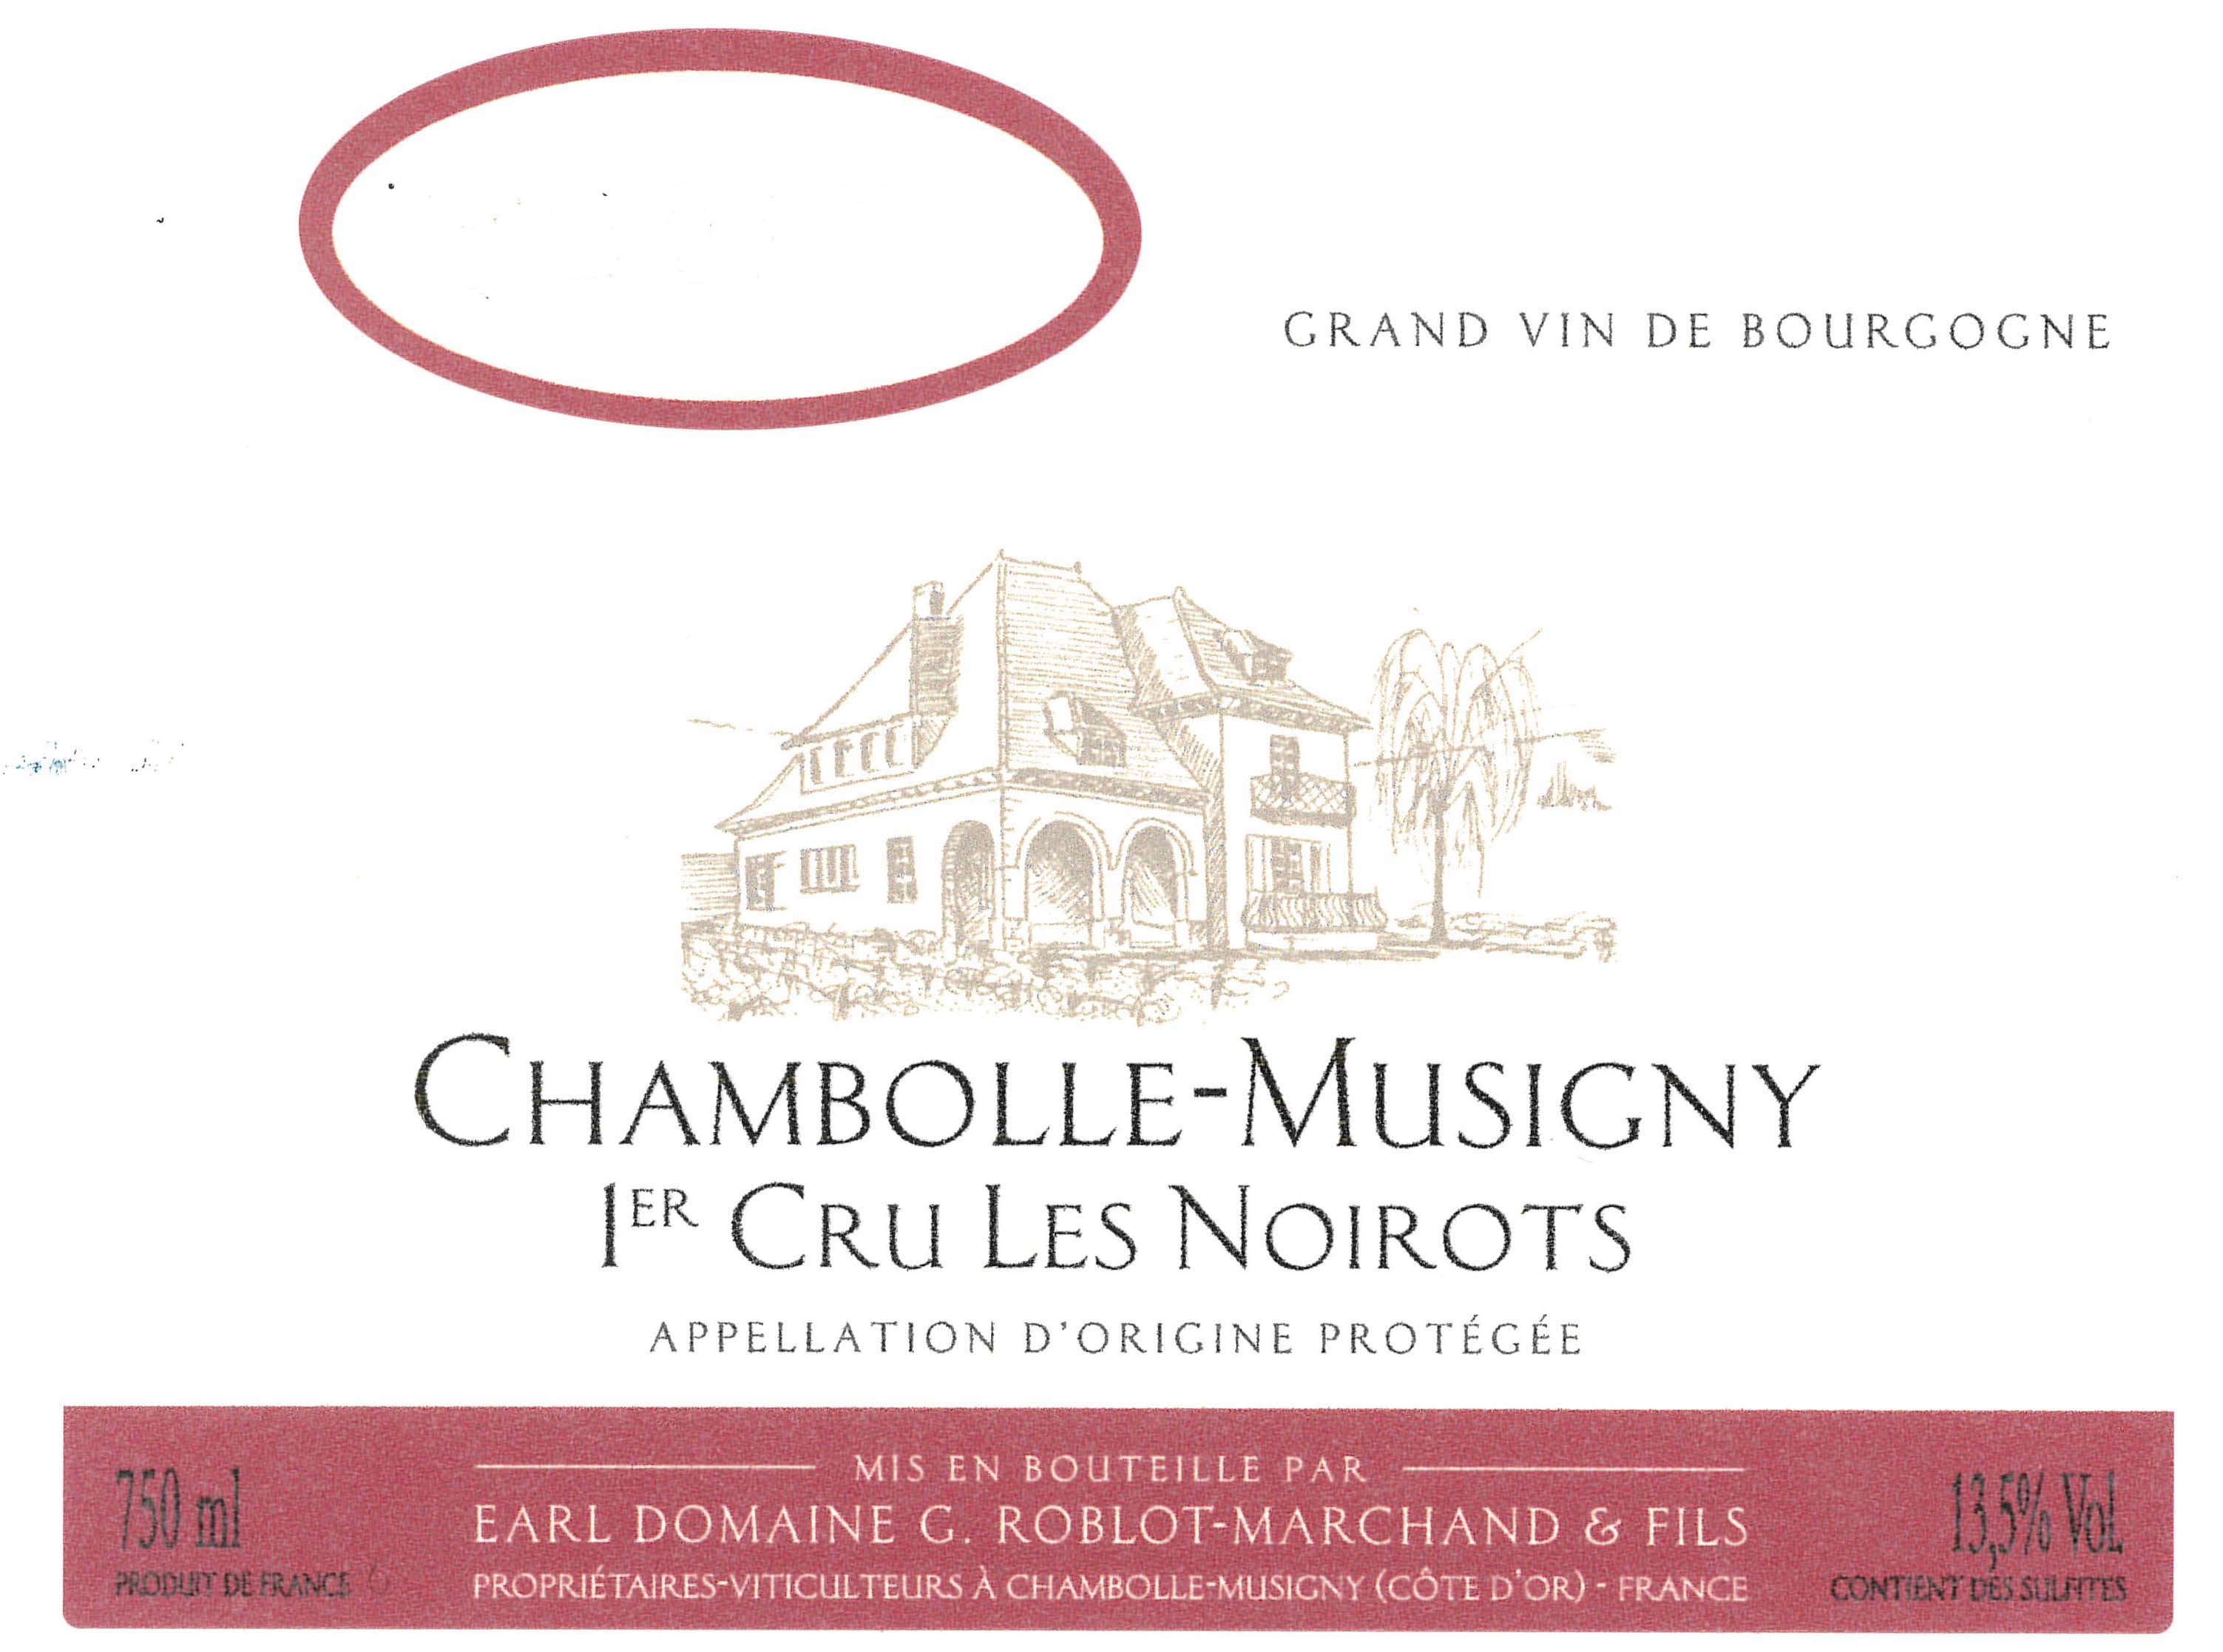 Domaine Roblot-Marchand - Chambolle Musigny 1er Cru - Les Noirots label